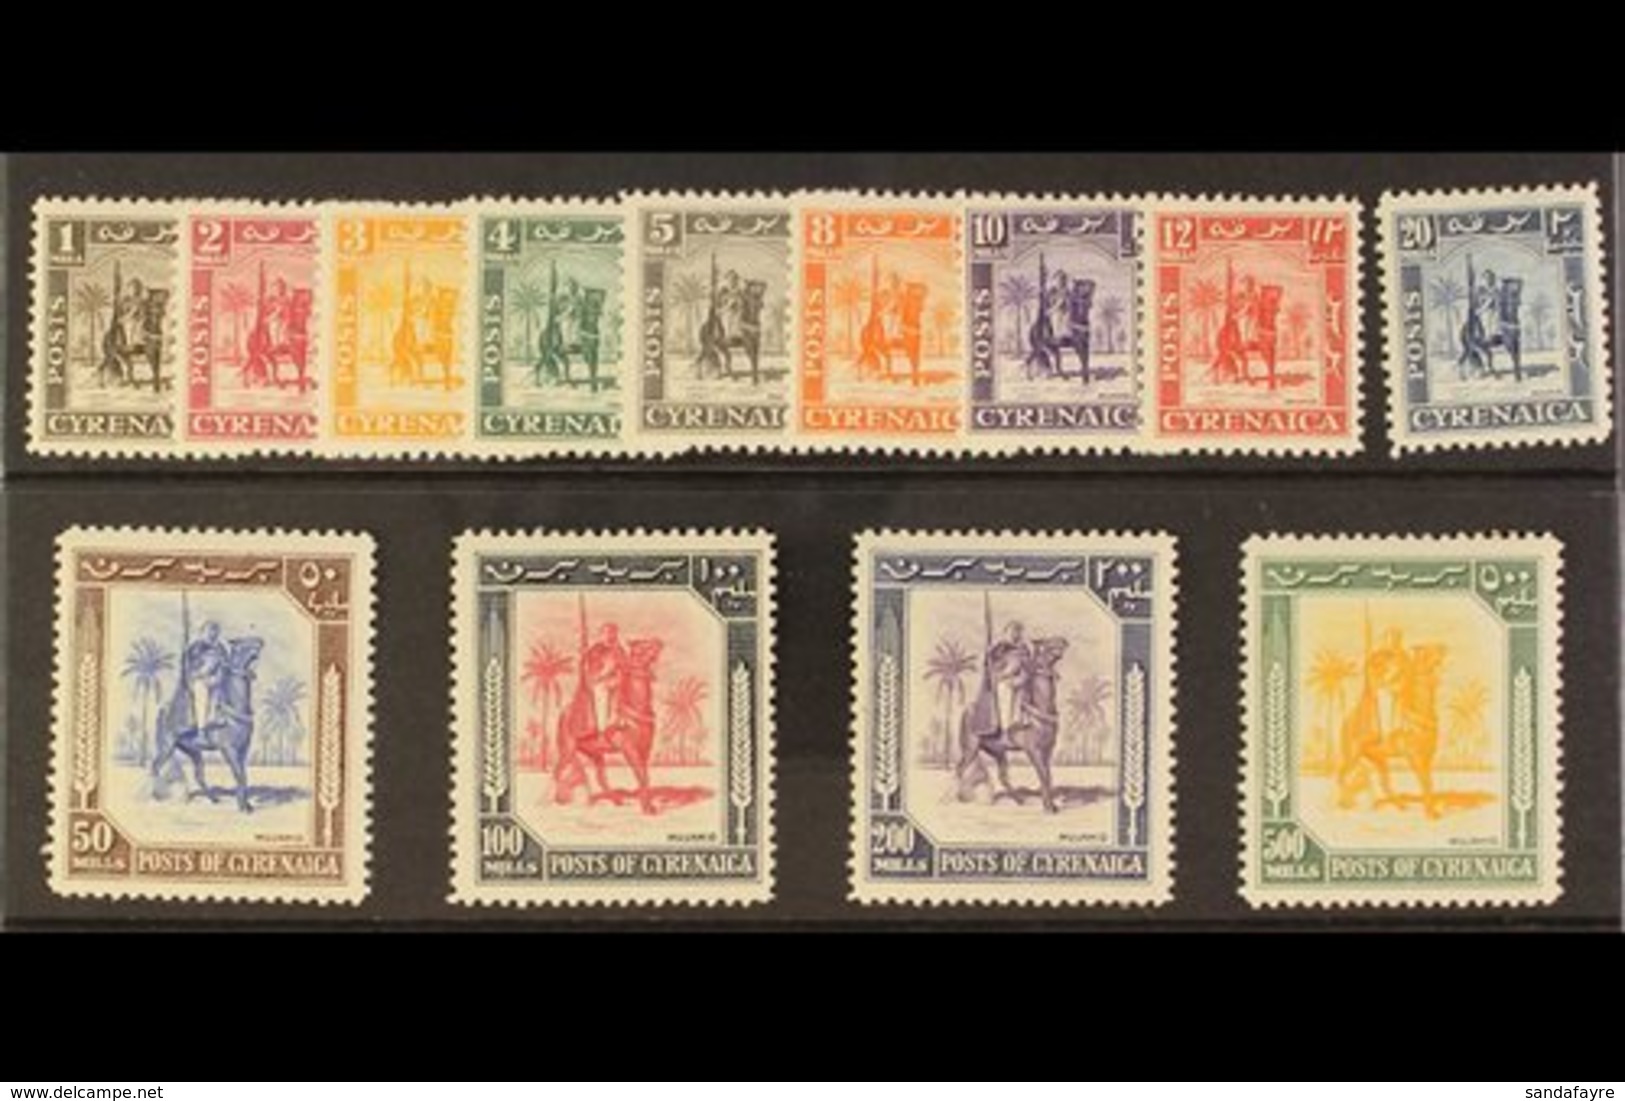 \Y CYRENAICA\Y 1950 Definitives Complete Set, SG 136/48, Very Fine Never Hinged Mint. (13 Stamps) For More Images, Pleas - Afrique Orientale Italienne